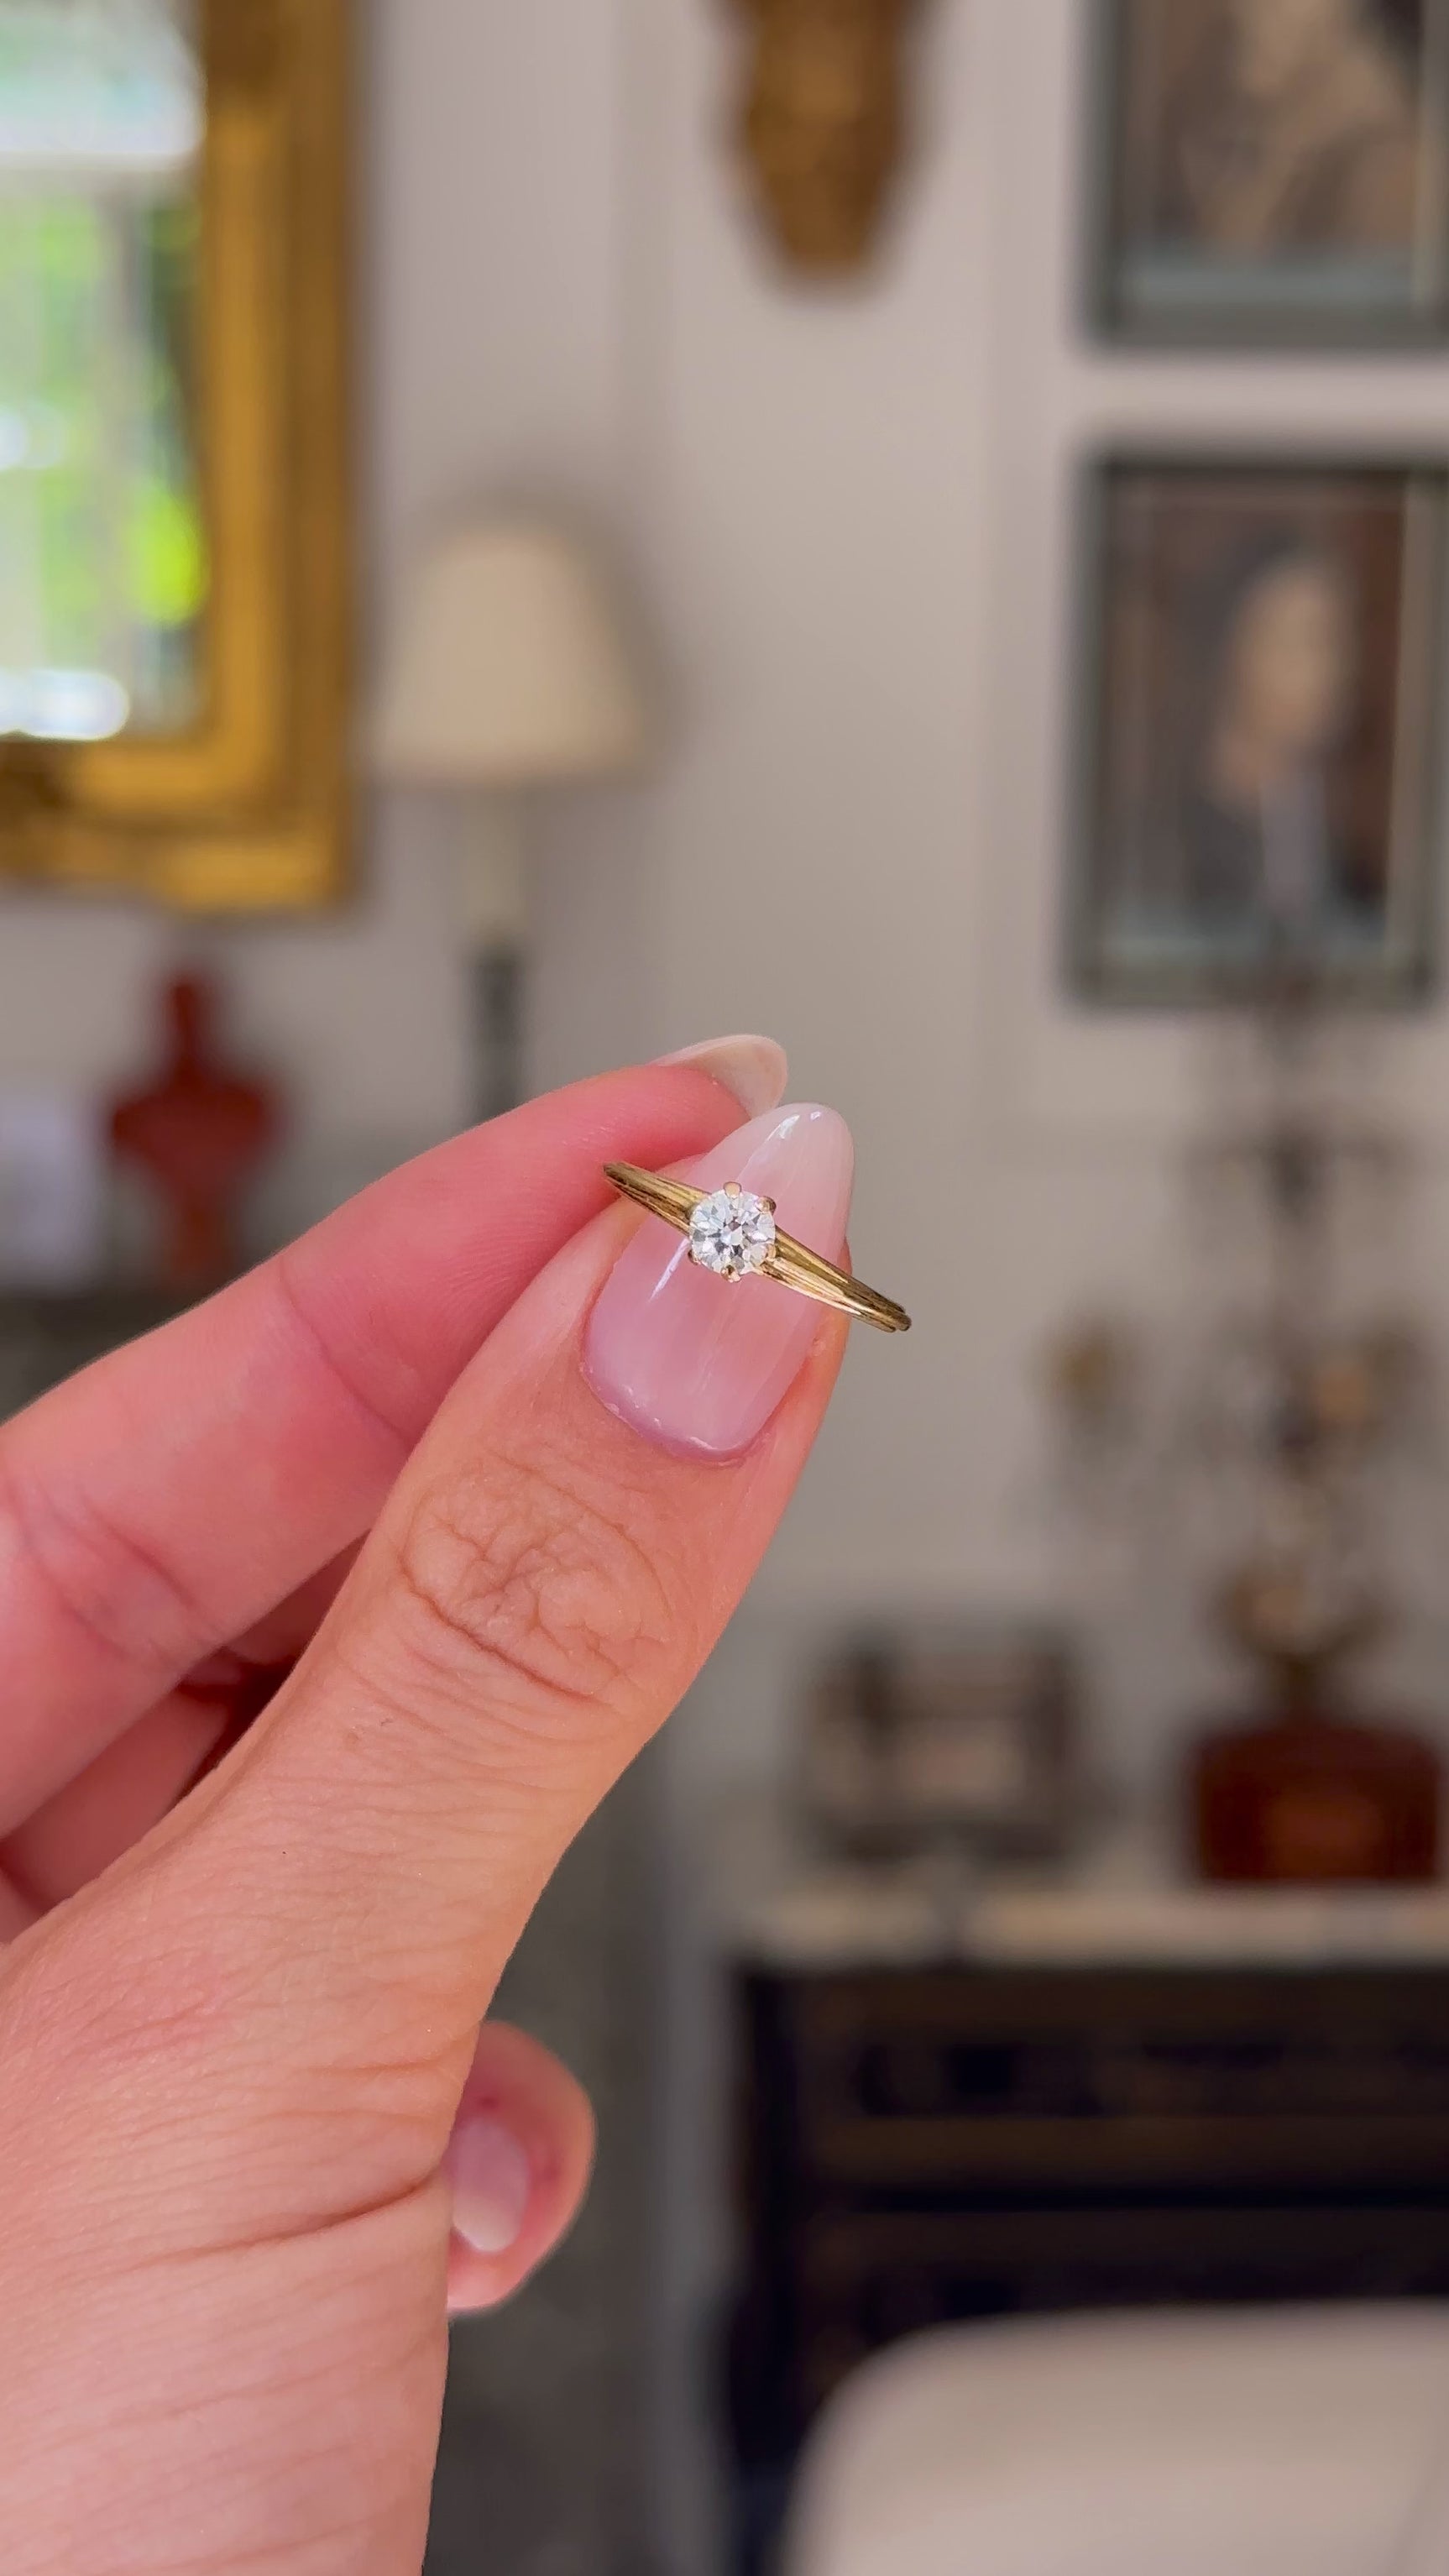 Vintage solitaire diamond engagement ring held in fingers and moved around to give perspective.